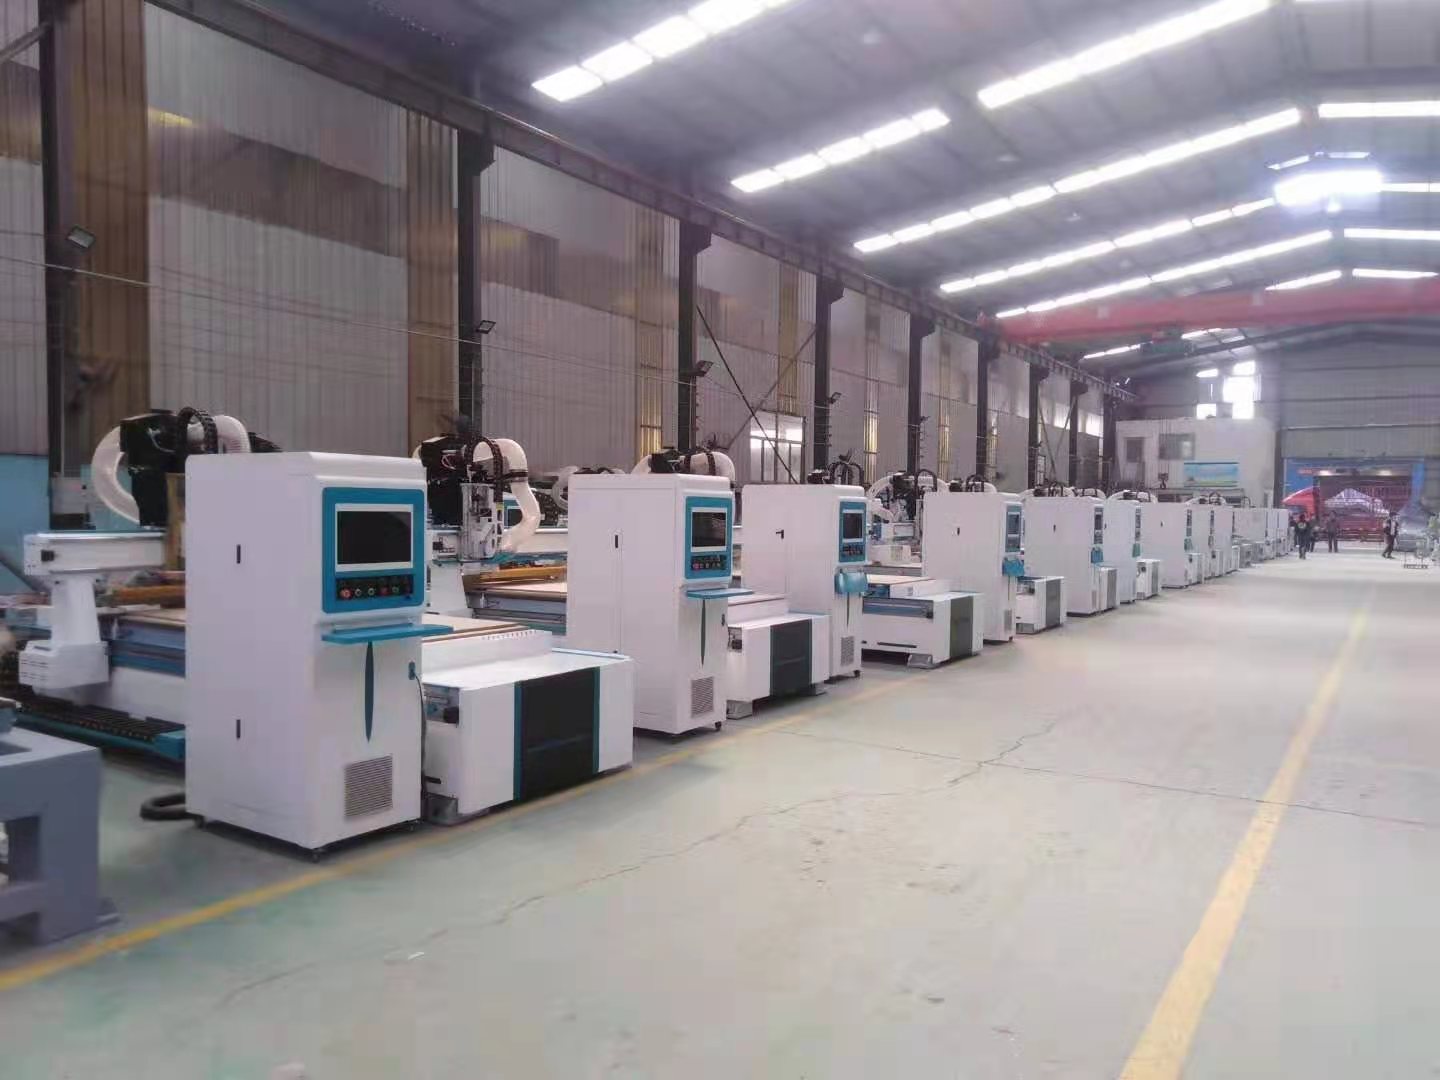 Workshop of Pallet Wrapping Machine made in china46.jpg